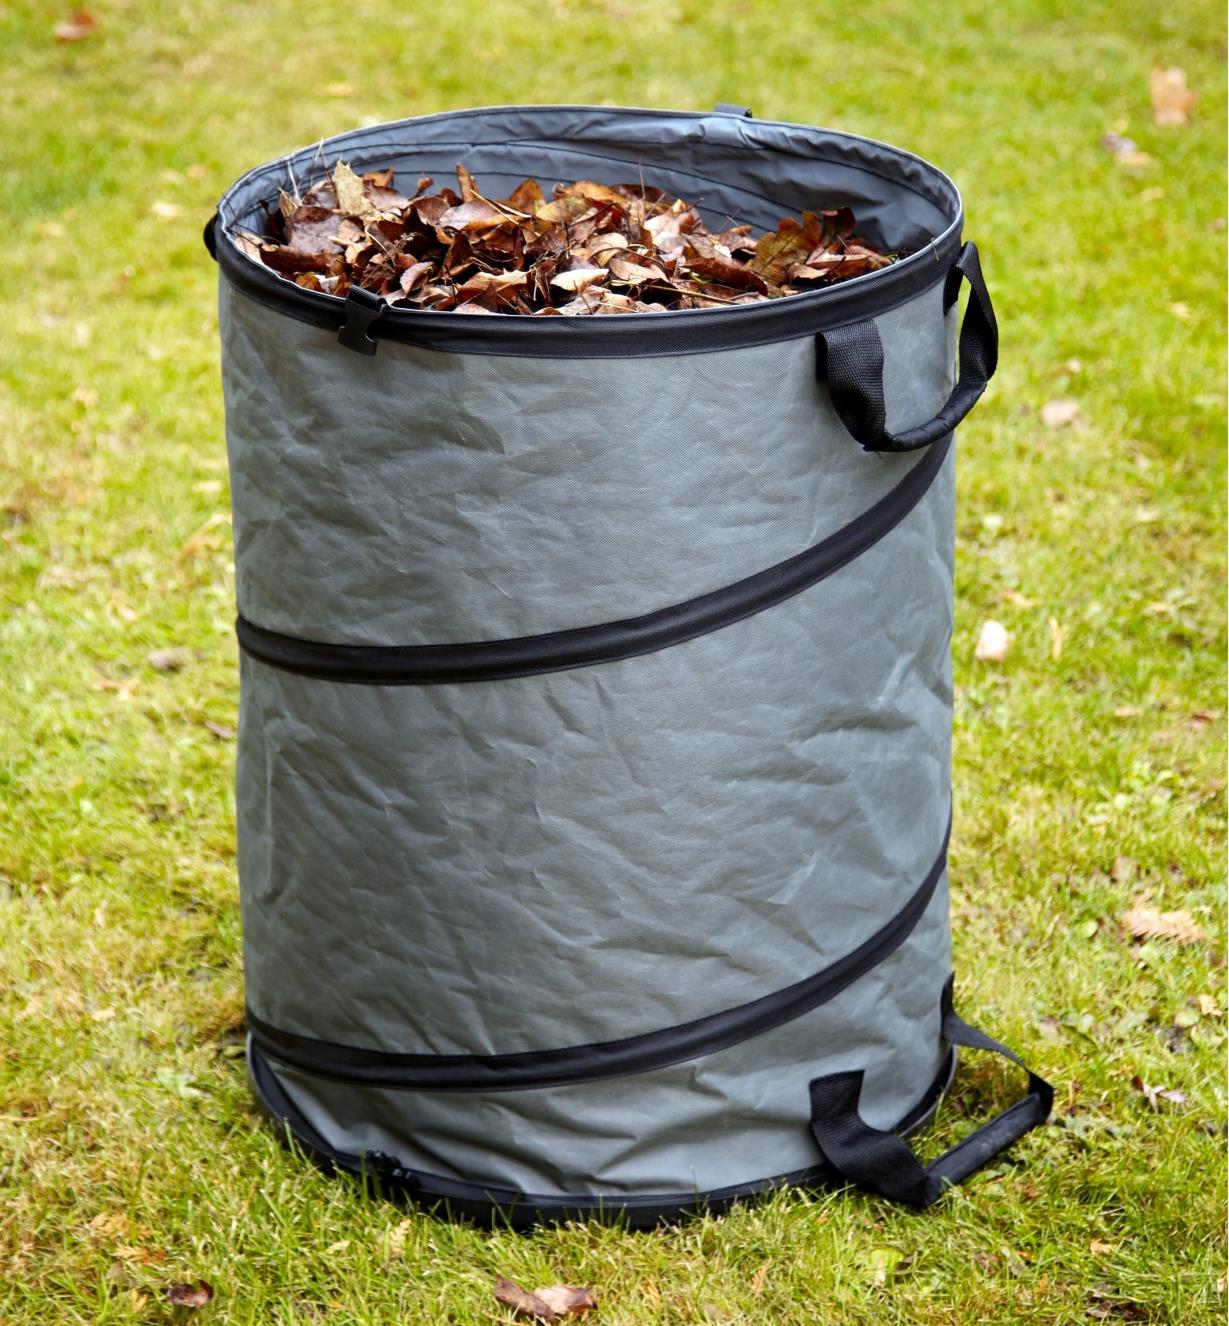 Hard-bottom pop-up tote filled with yard waste